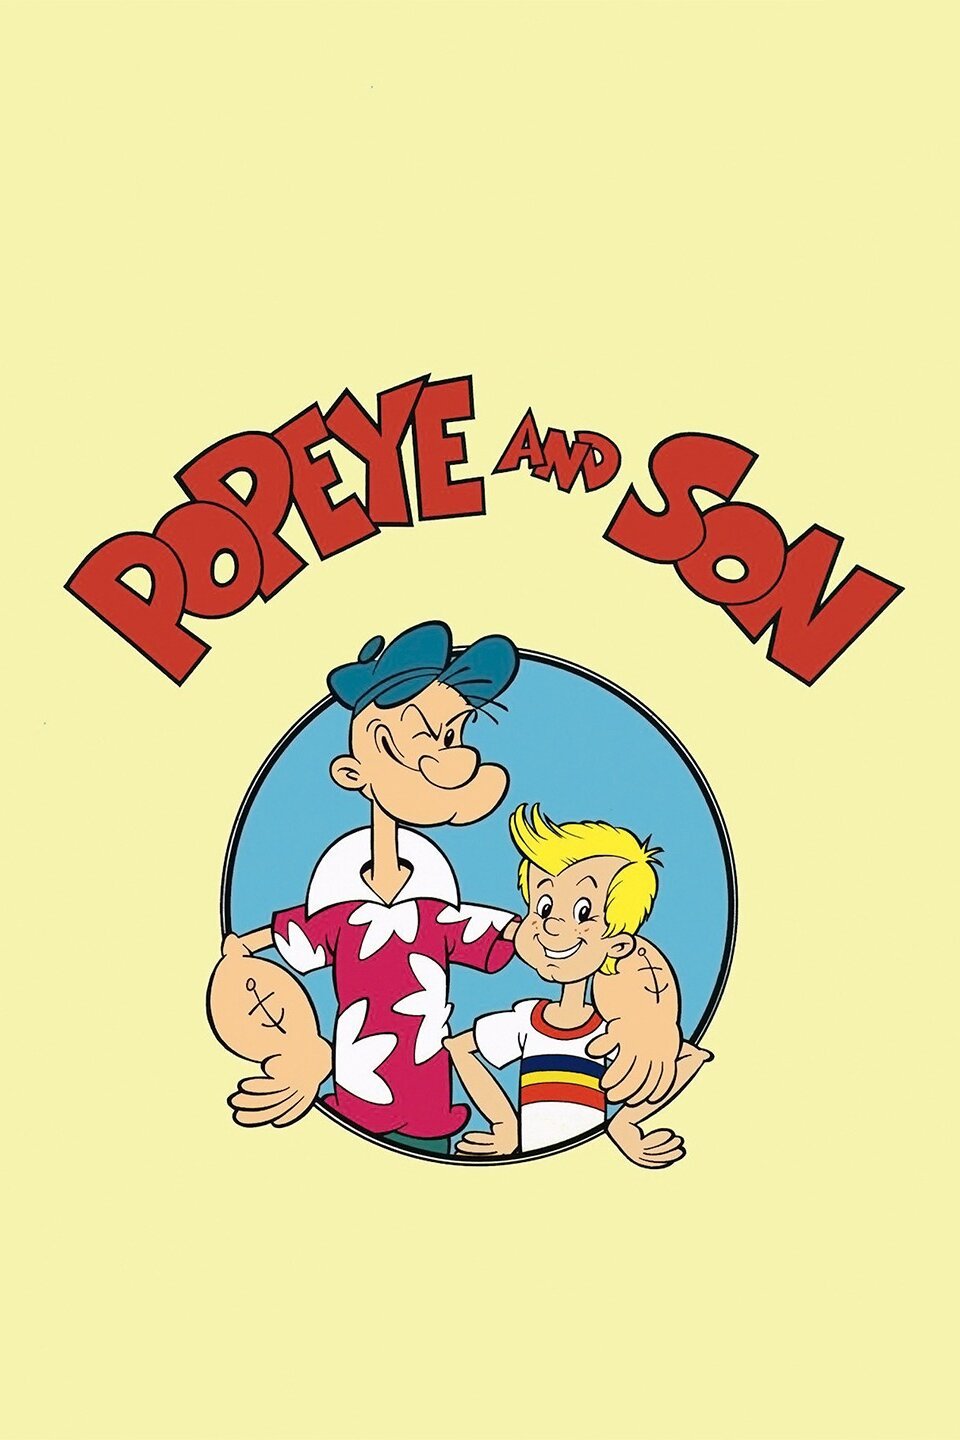 Popeye and Son - Rotten Tomatoes